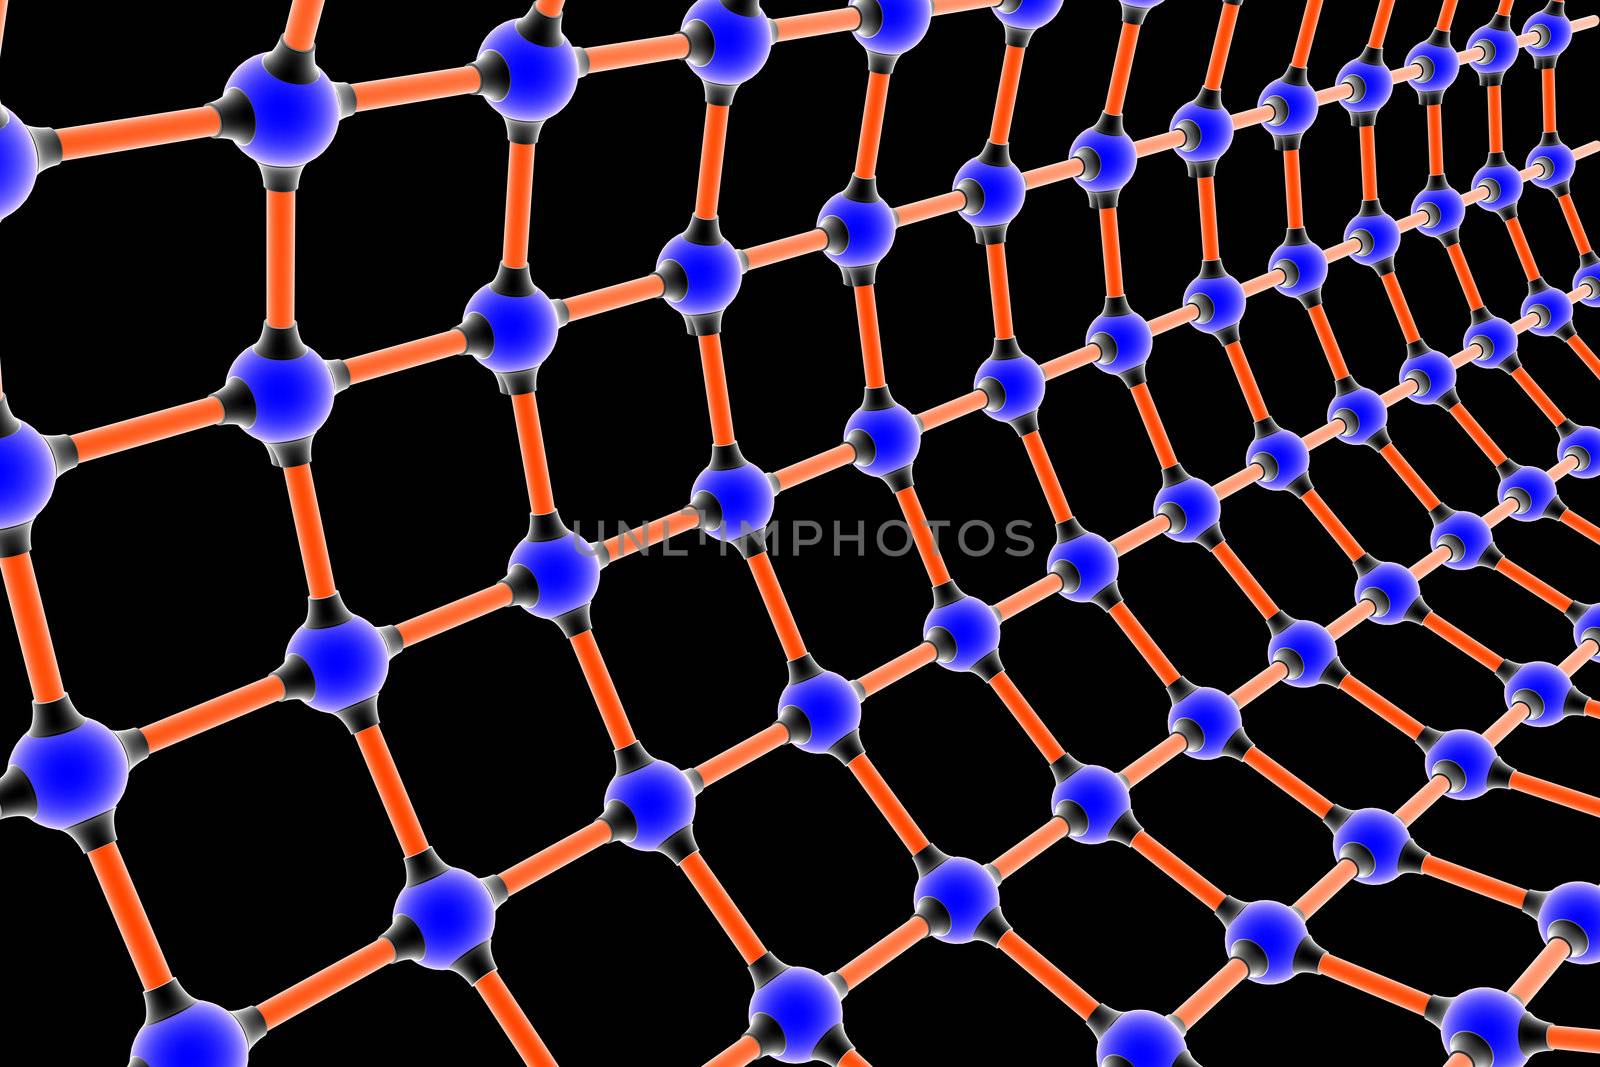 Atoms on black. Image generated in 3D application. High resolution image.